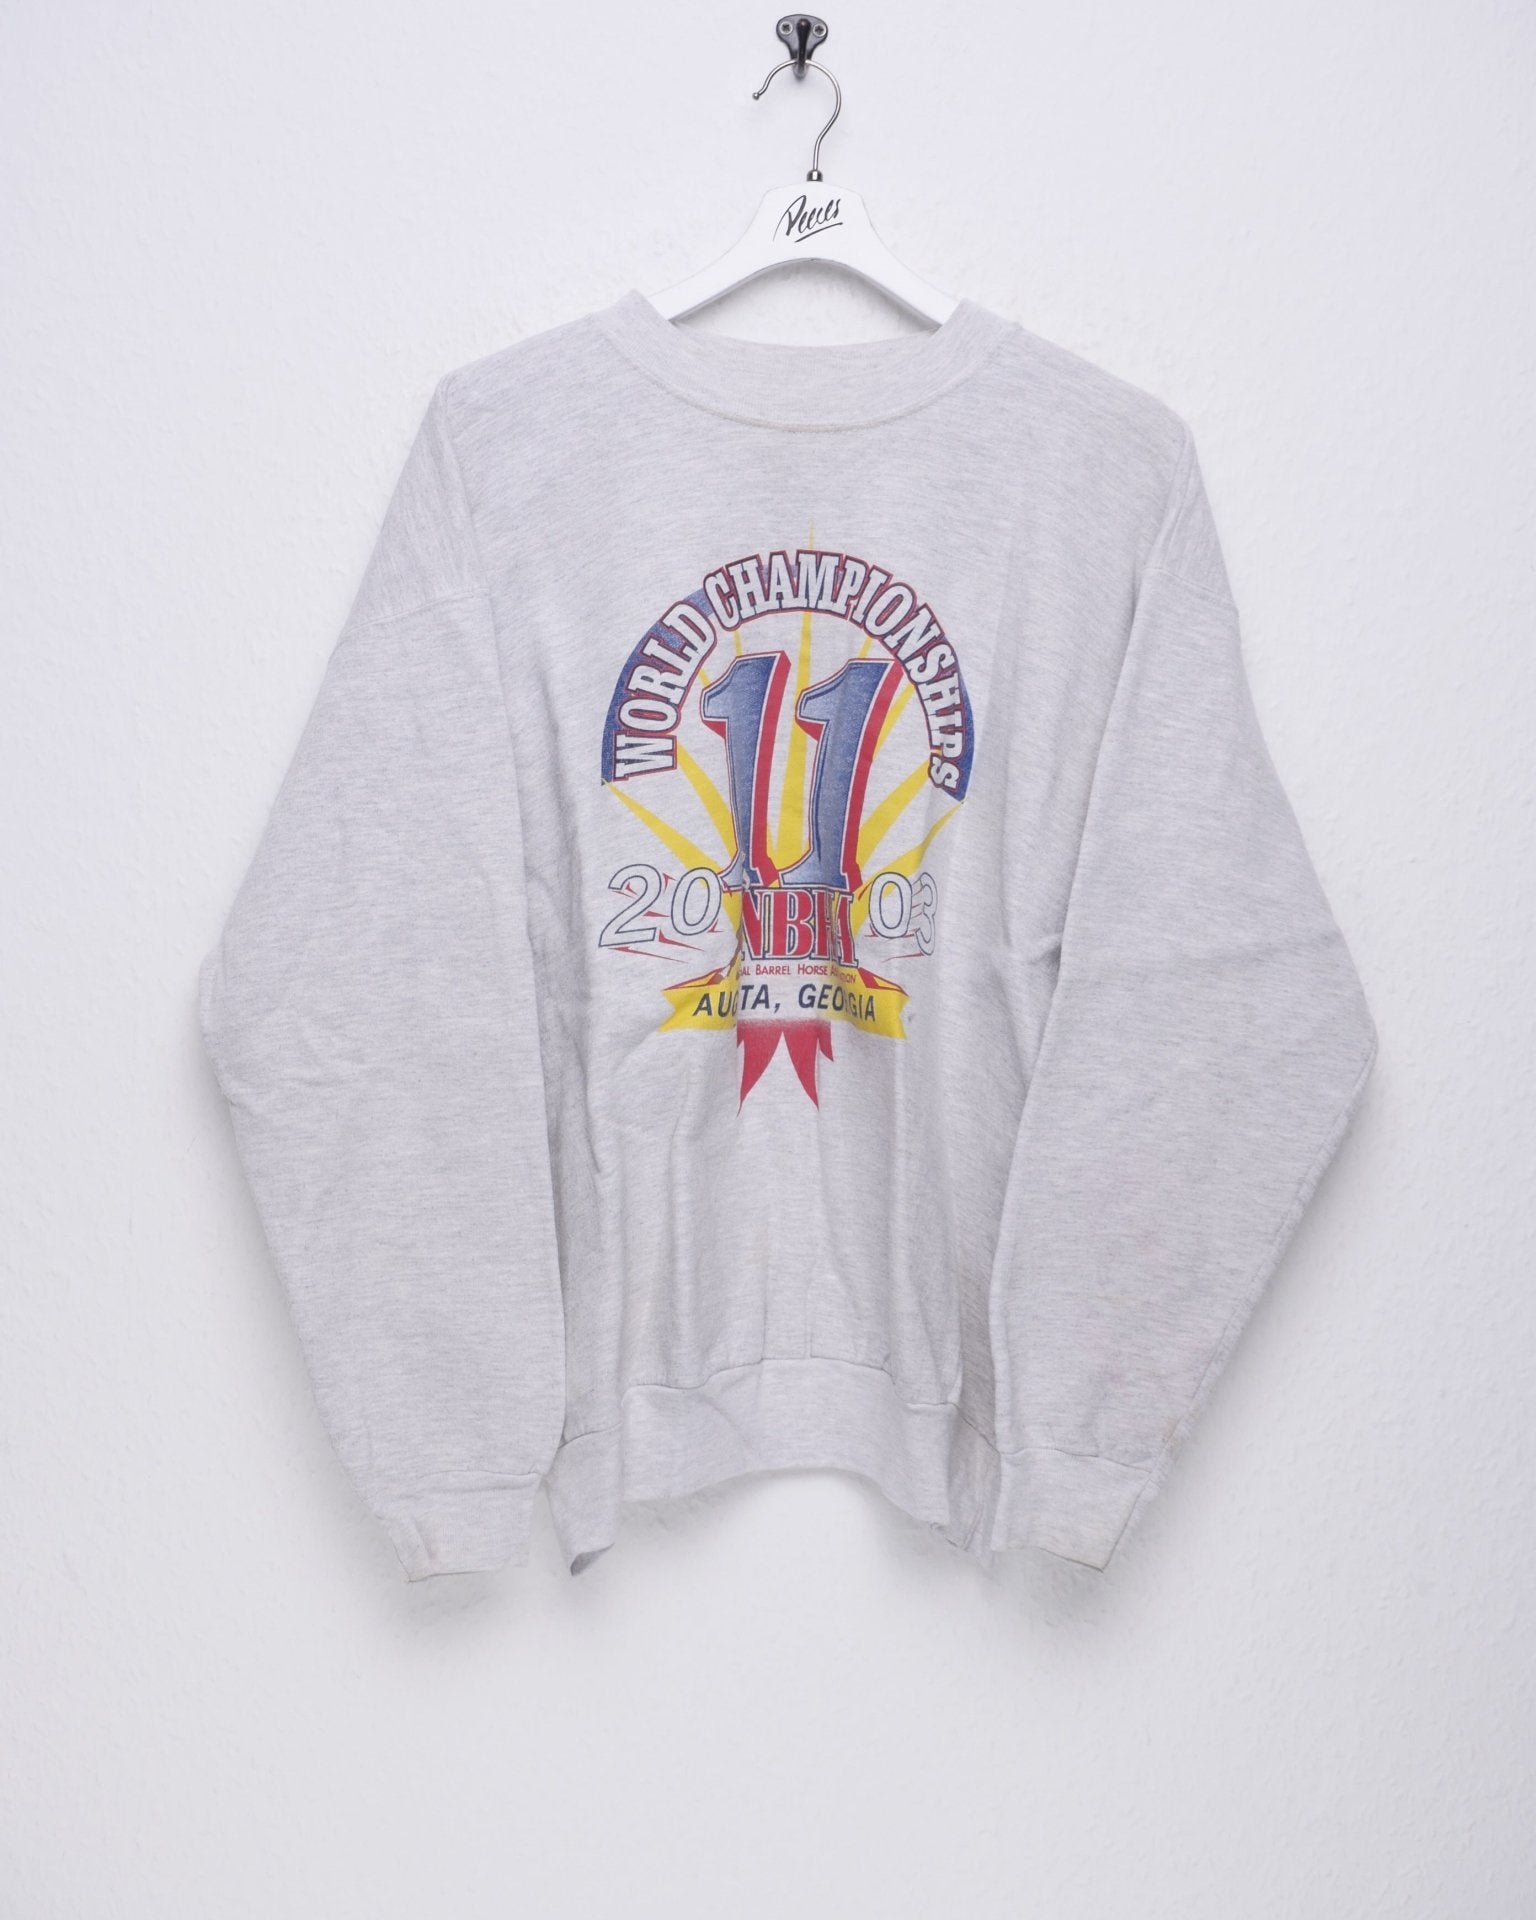 World Championships printed Graphic Vintage Sweater - Peeces